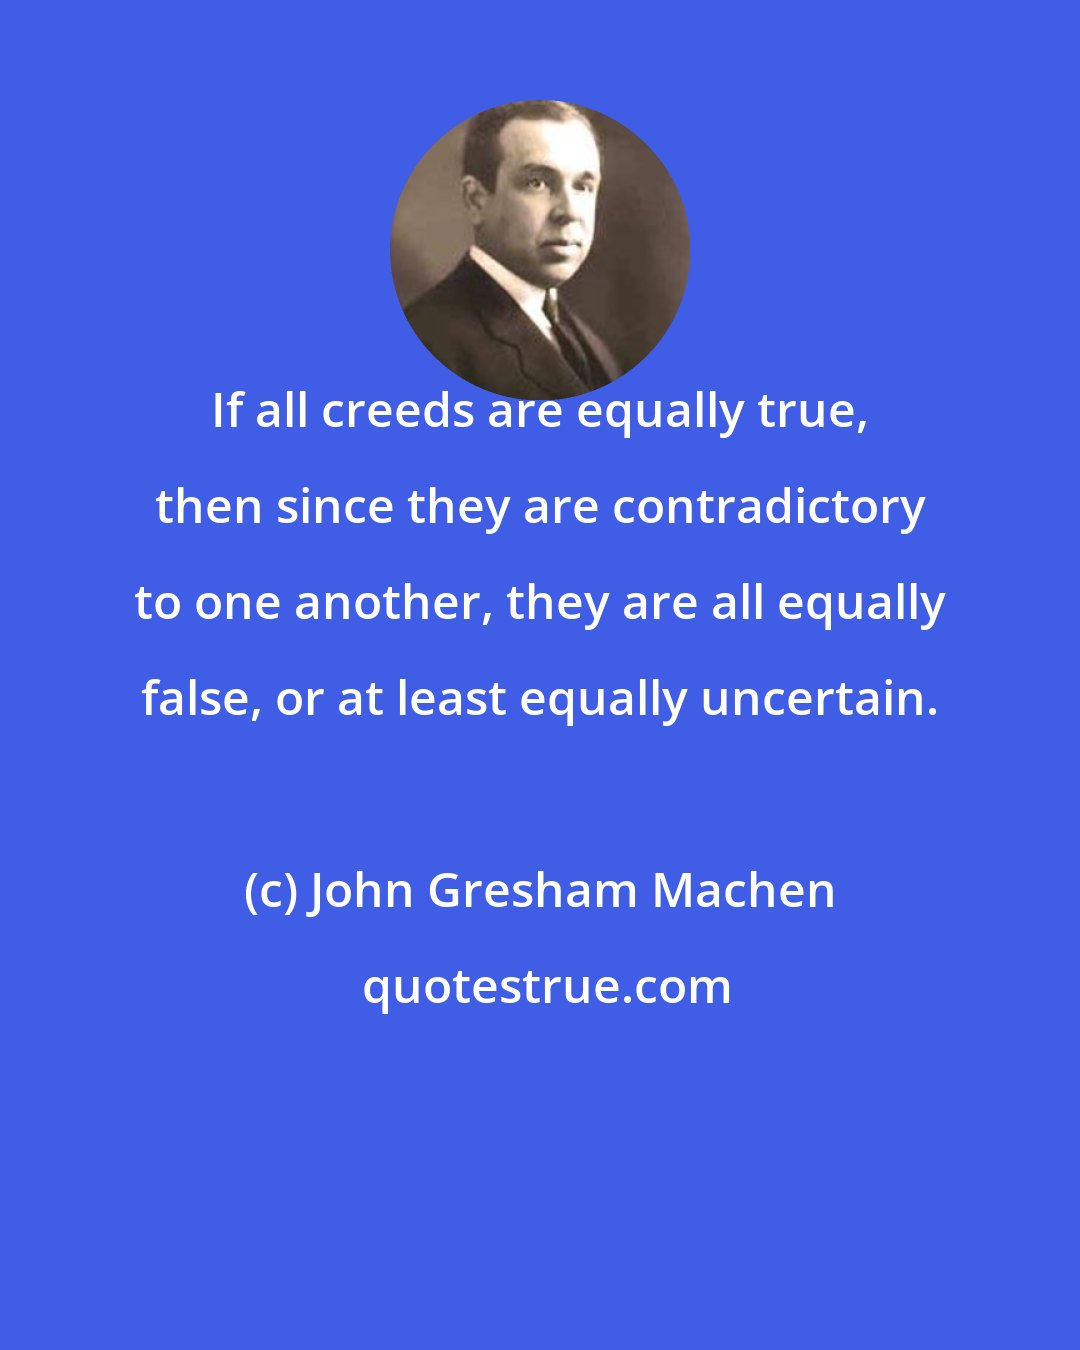 John Gresham Machen: If all creeds are equally true, then since they are contradictory to one another, they are all equally false, or at least equally uncertain.